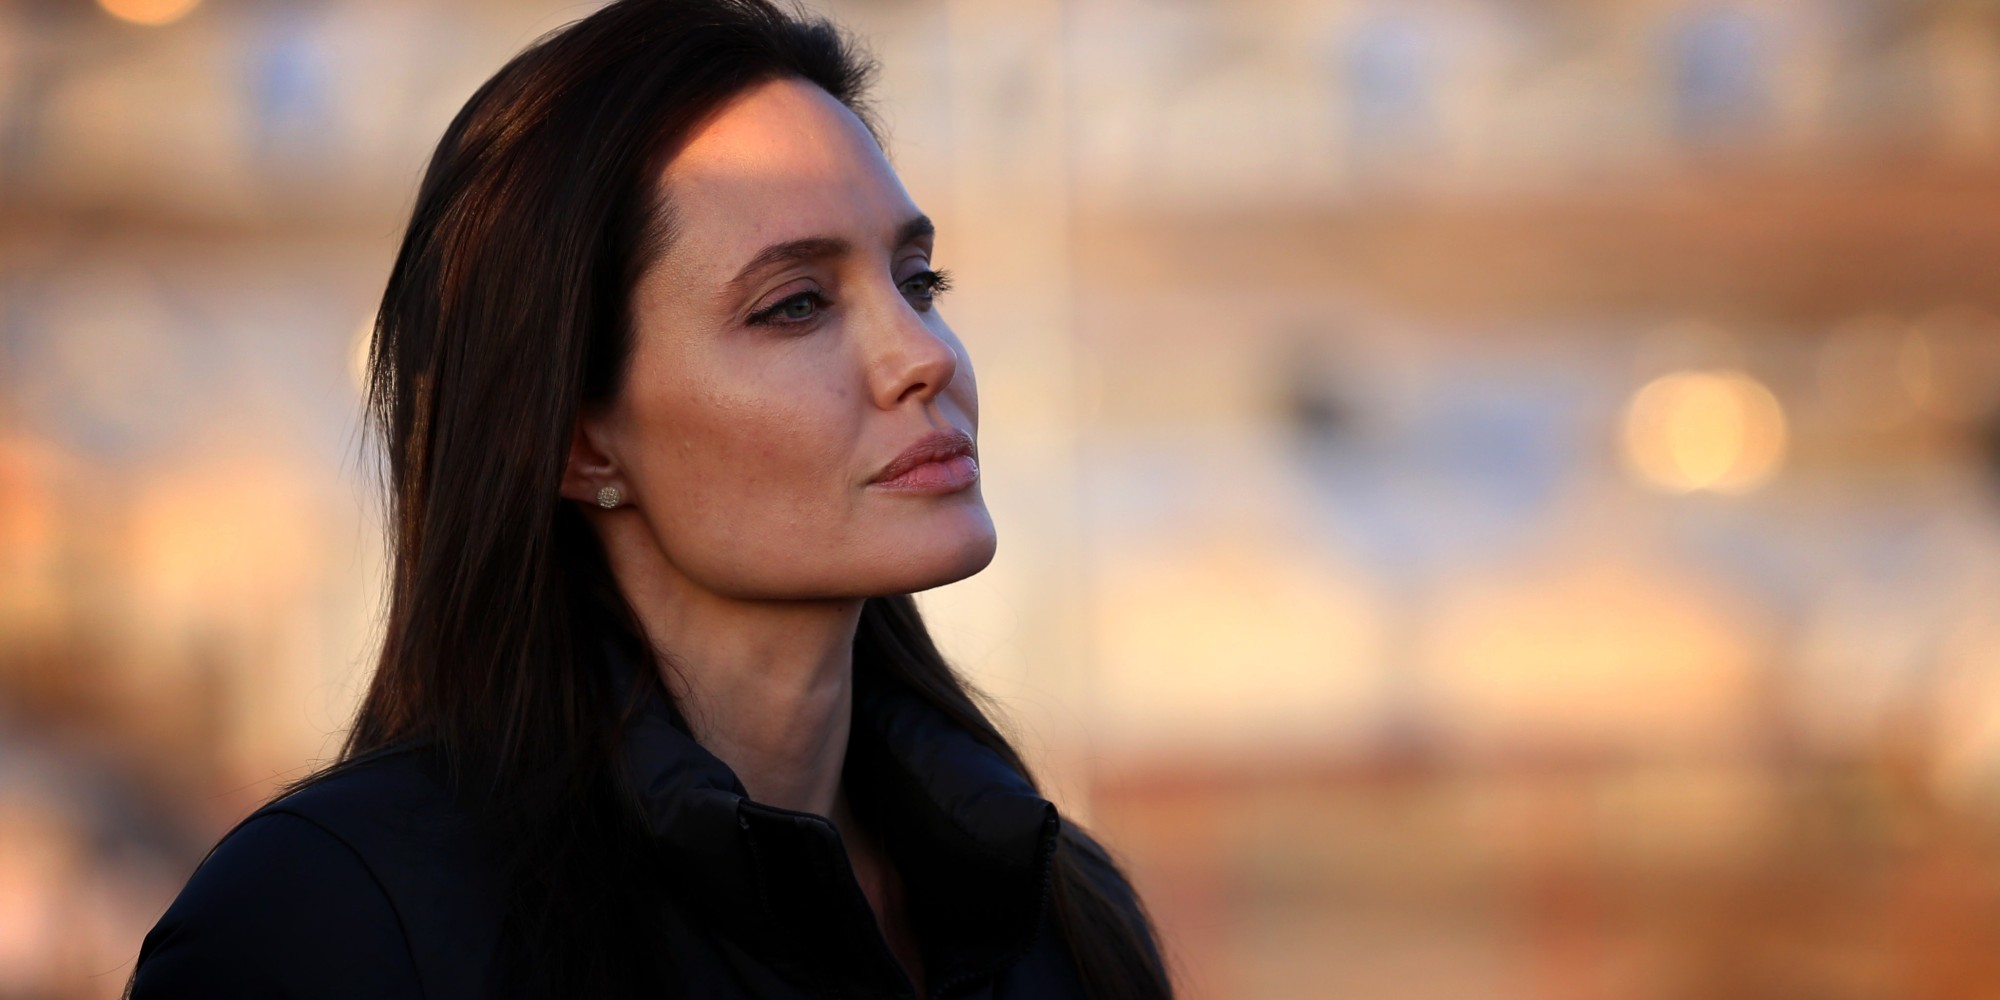 Angelina Jolie Undergoes Surgery To Remove Ovaries Fallopian Tubes To